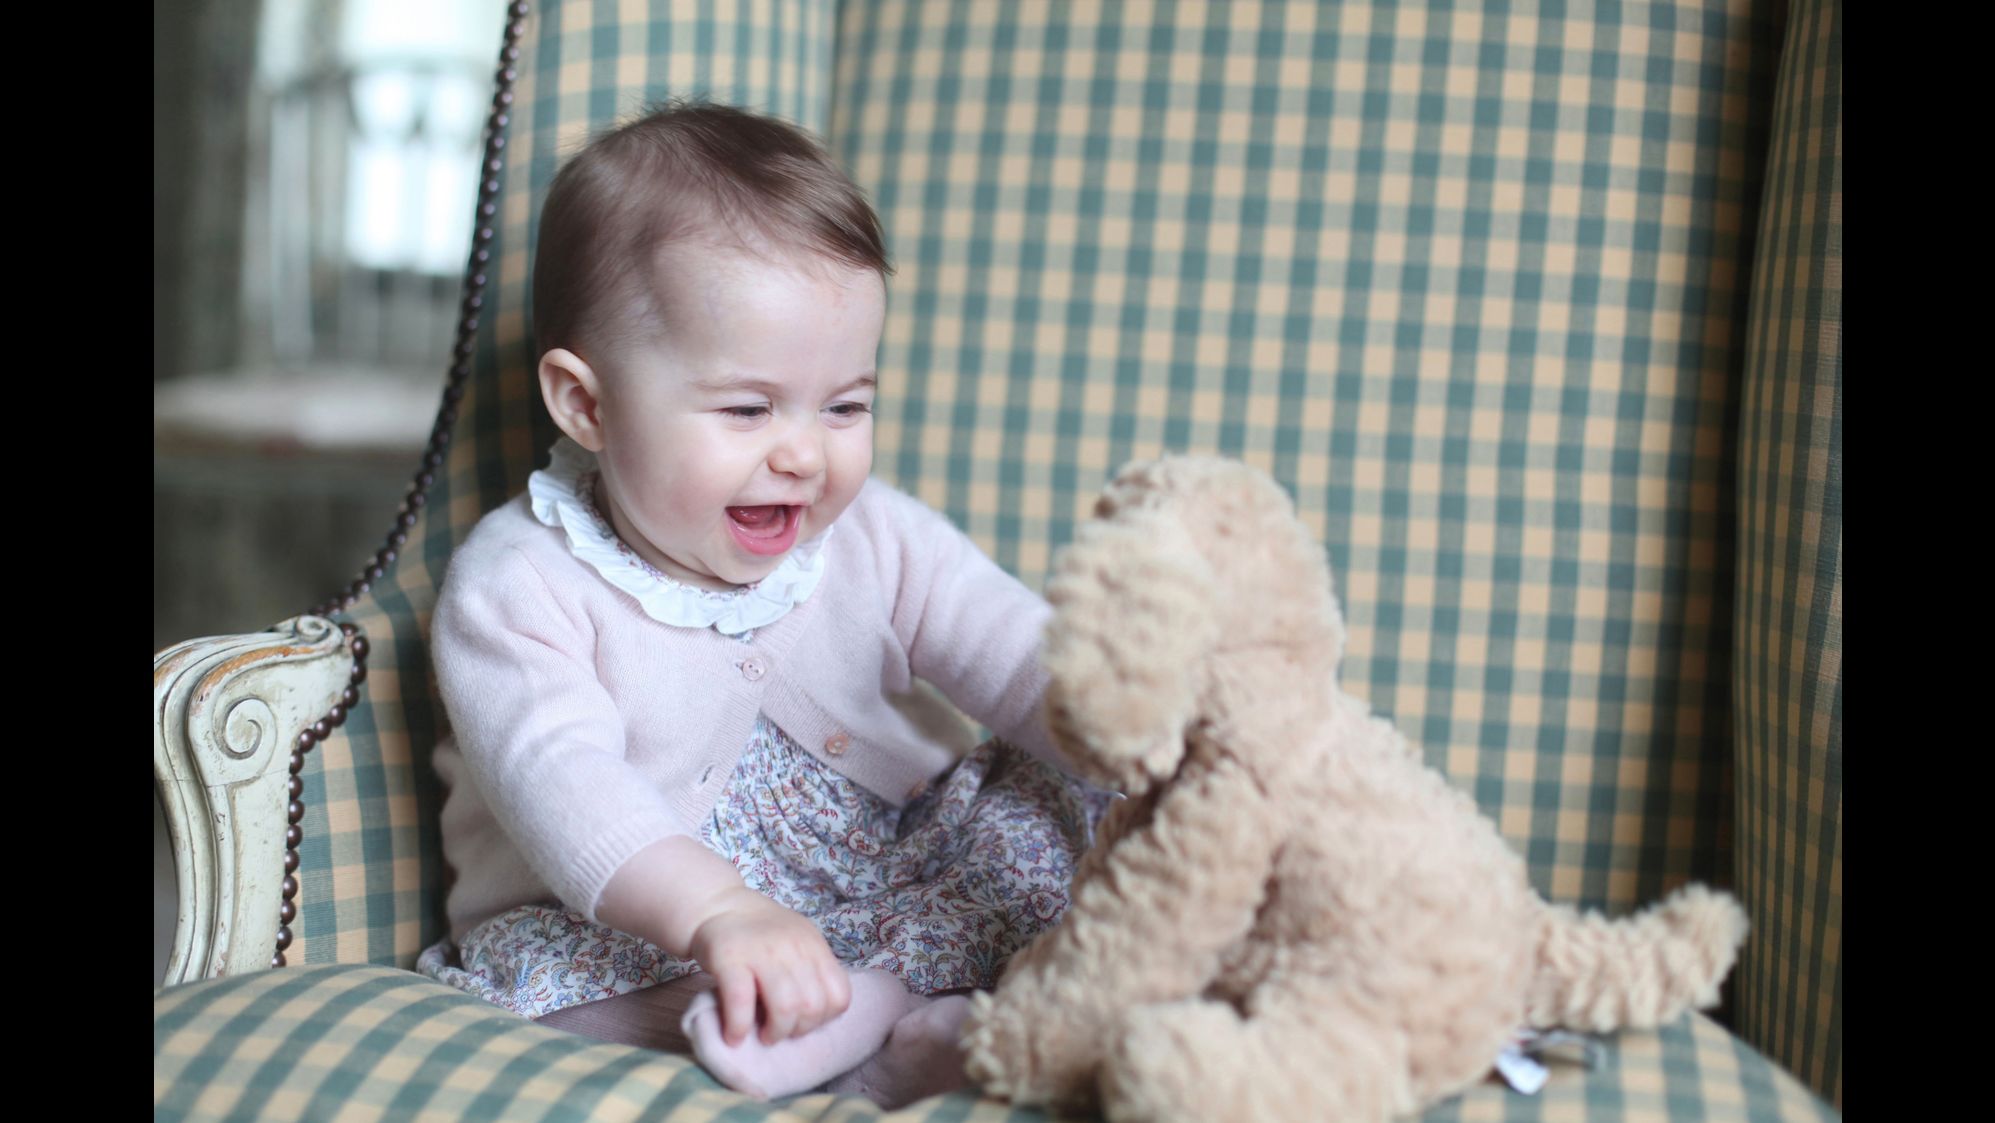 Princess Charlotte plays with a stuffed dog in this photo taken by her mother in November 2015.